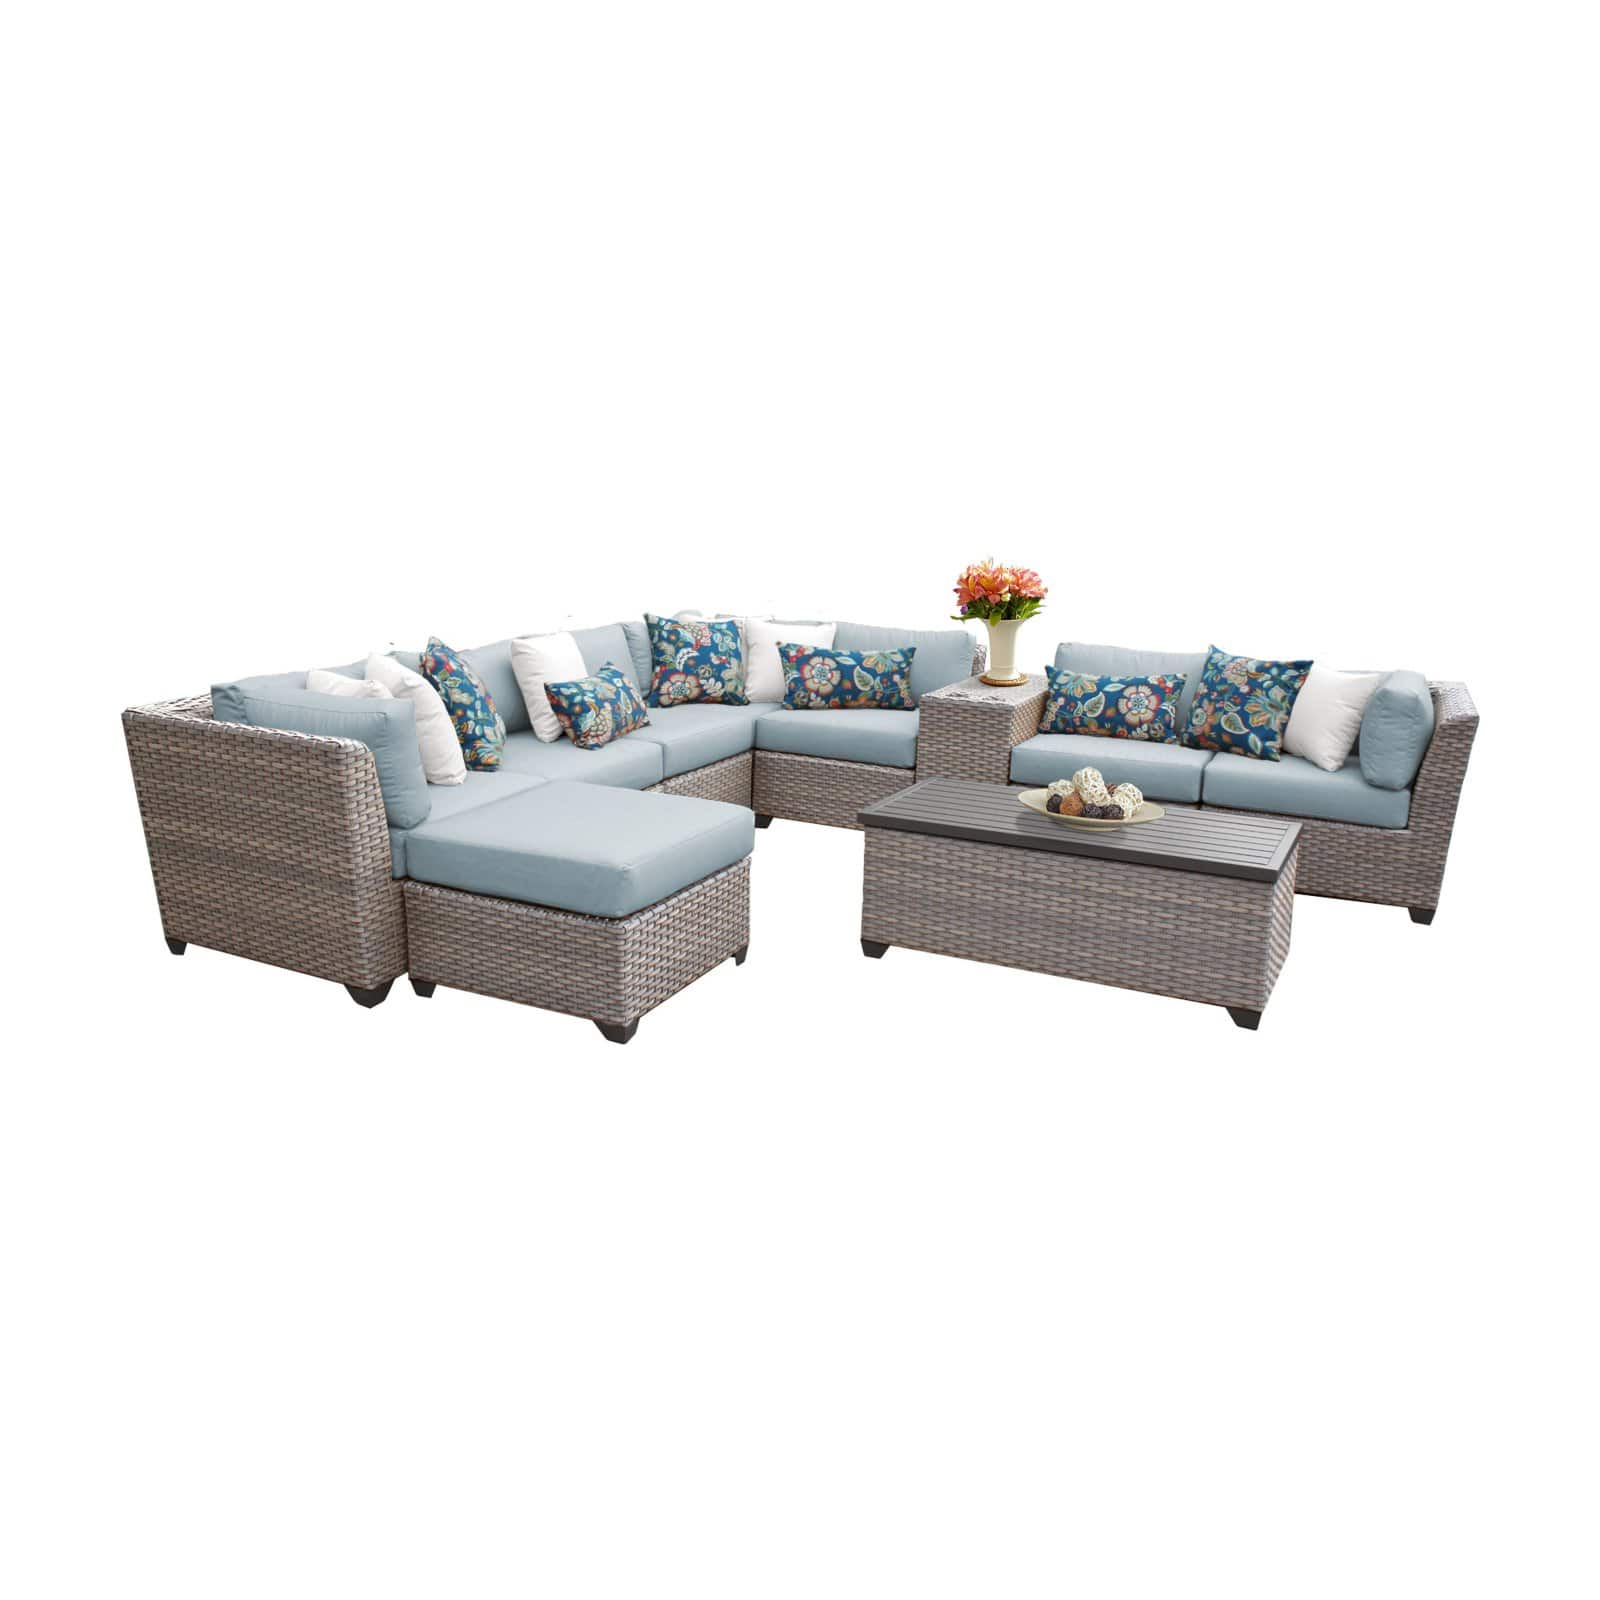 TK Classics Florence Wicker 10 Piece Patio Conversation Set with Ottoman and 2 Sets of Cushion Covers - image 2 of 2